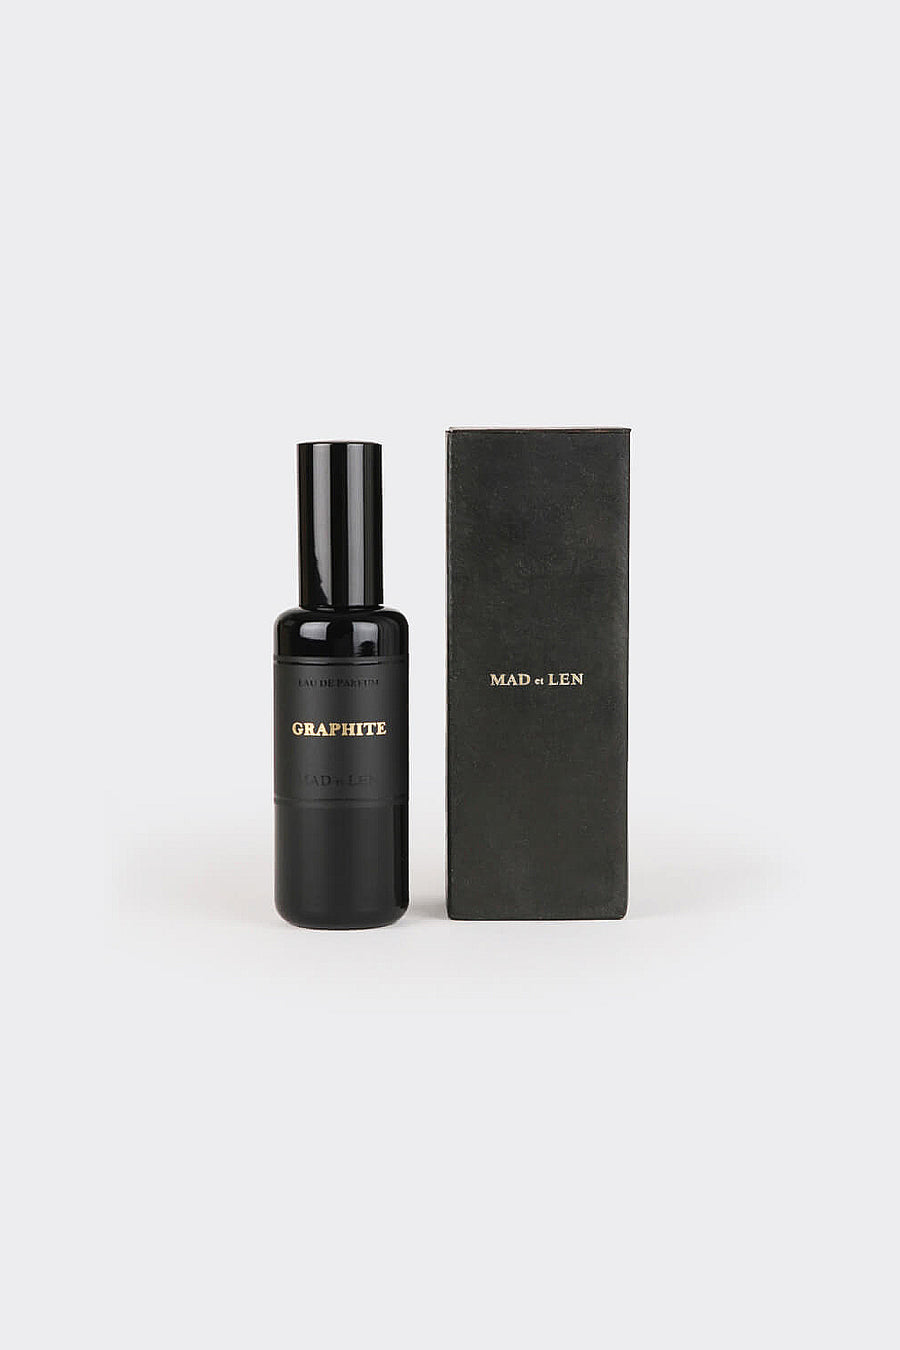 Buy the Mad et Len Eau De Parfum 50 ml Graphite at Intro. Spend £50 for free UK delivery. Official stockists. We ship worldwide.